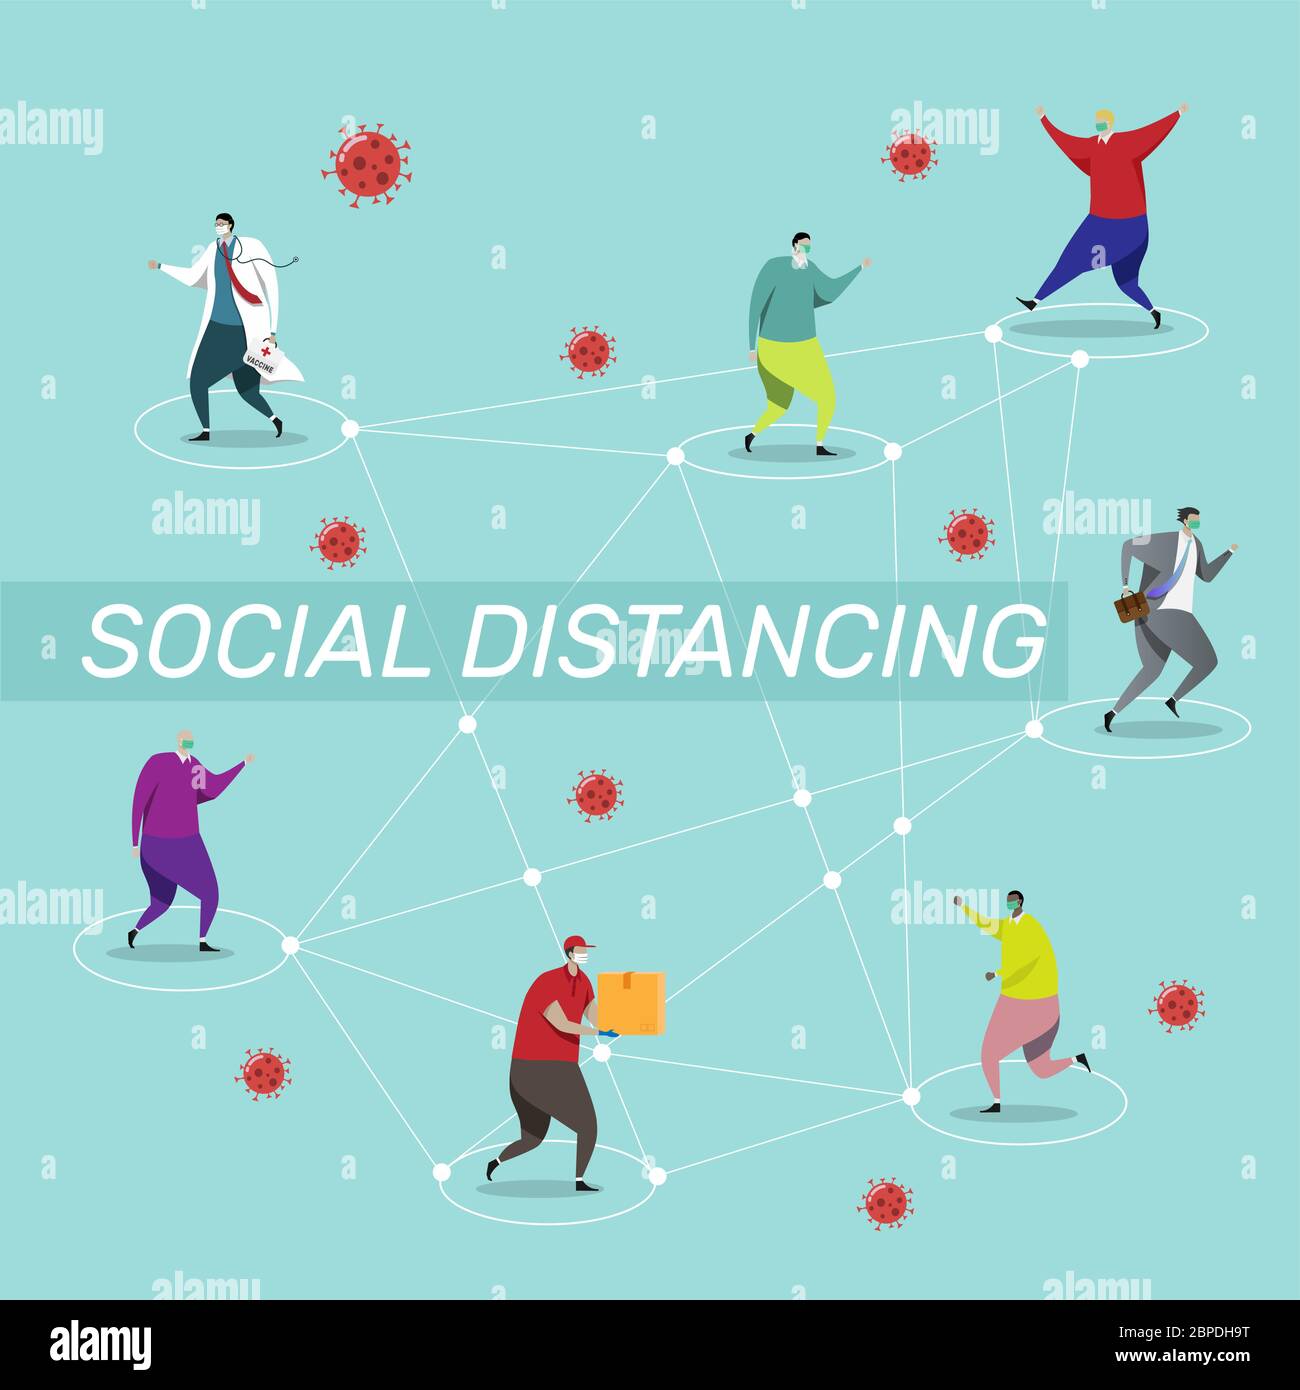 social distancing concept. people keep spaced between each other for social distancing, increasing the physical space between people to avoid spreadin Stock Vector